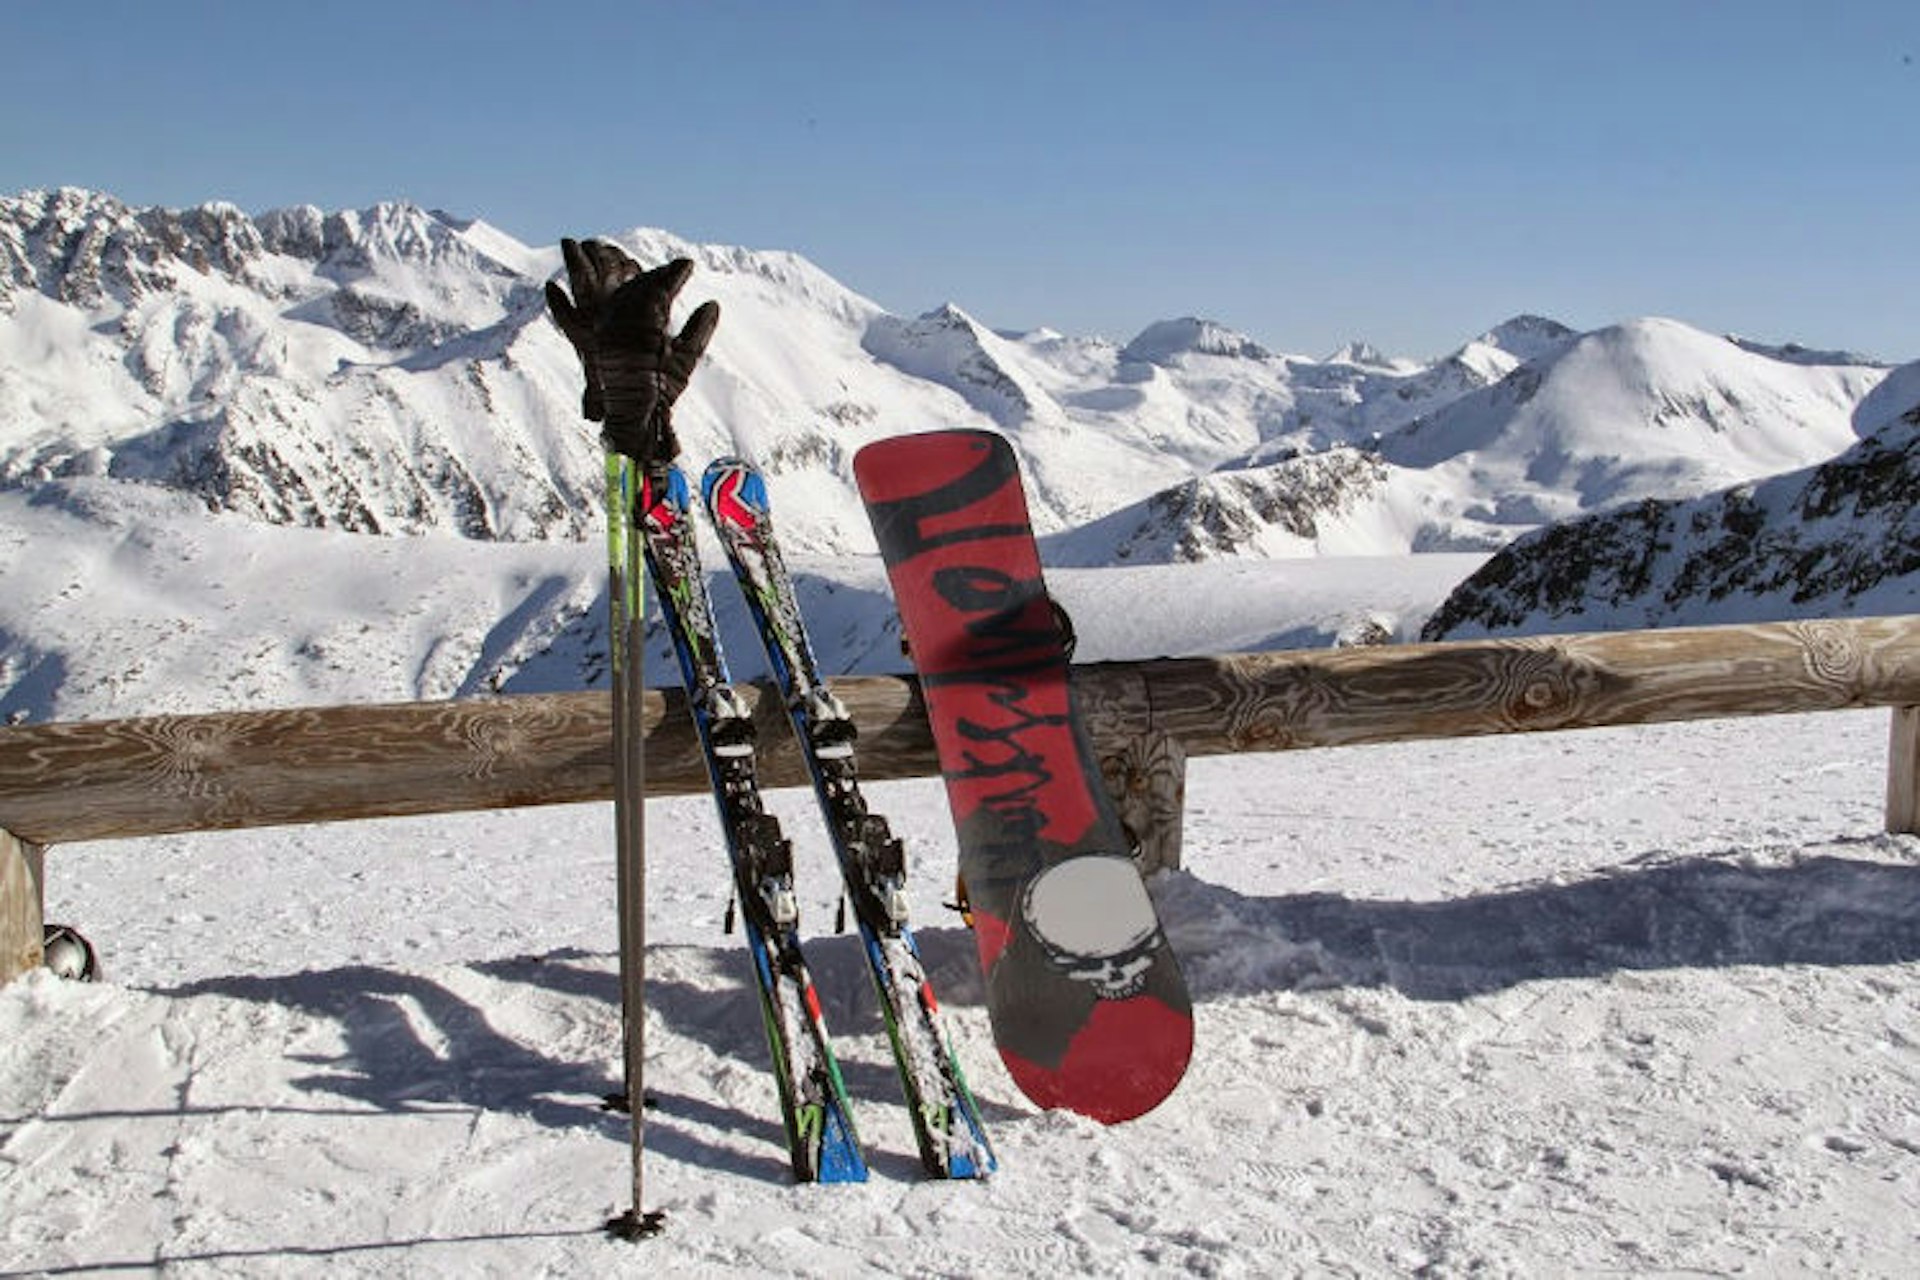 A set of skis and a snowboard lean against a fence in a mountainous snowy area